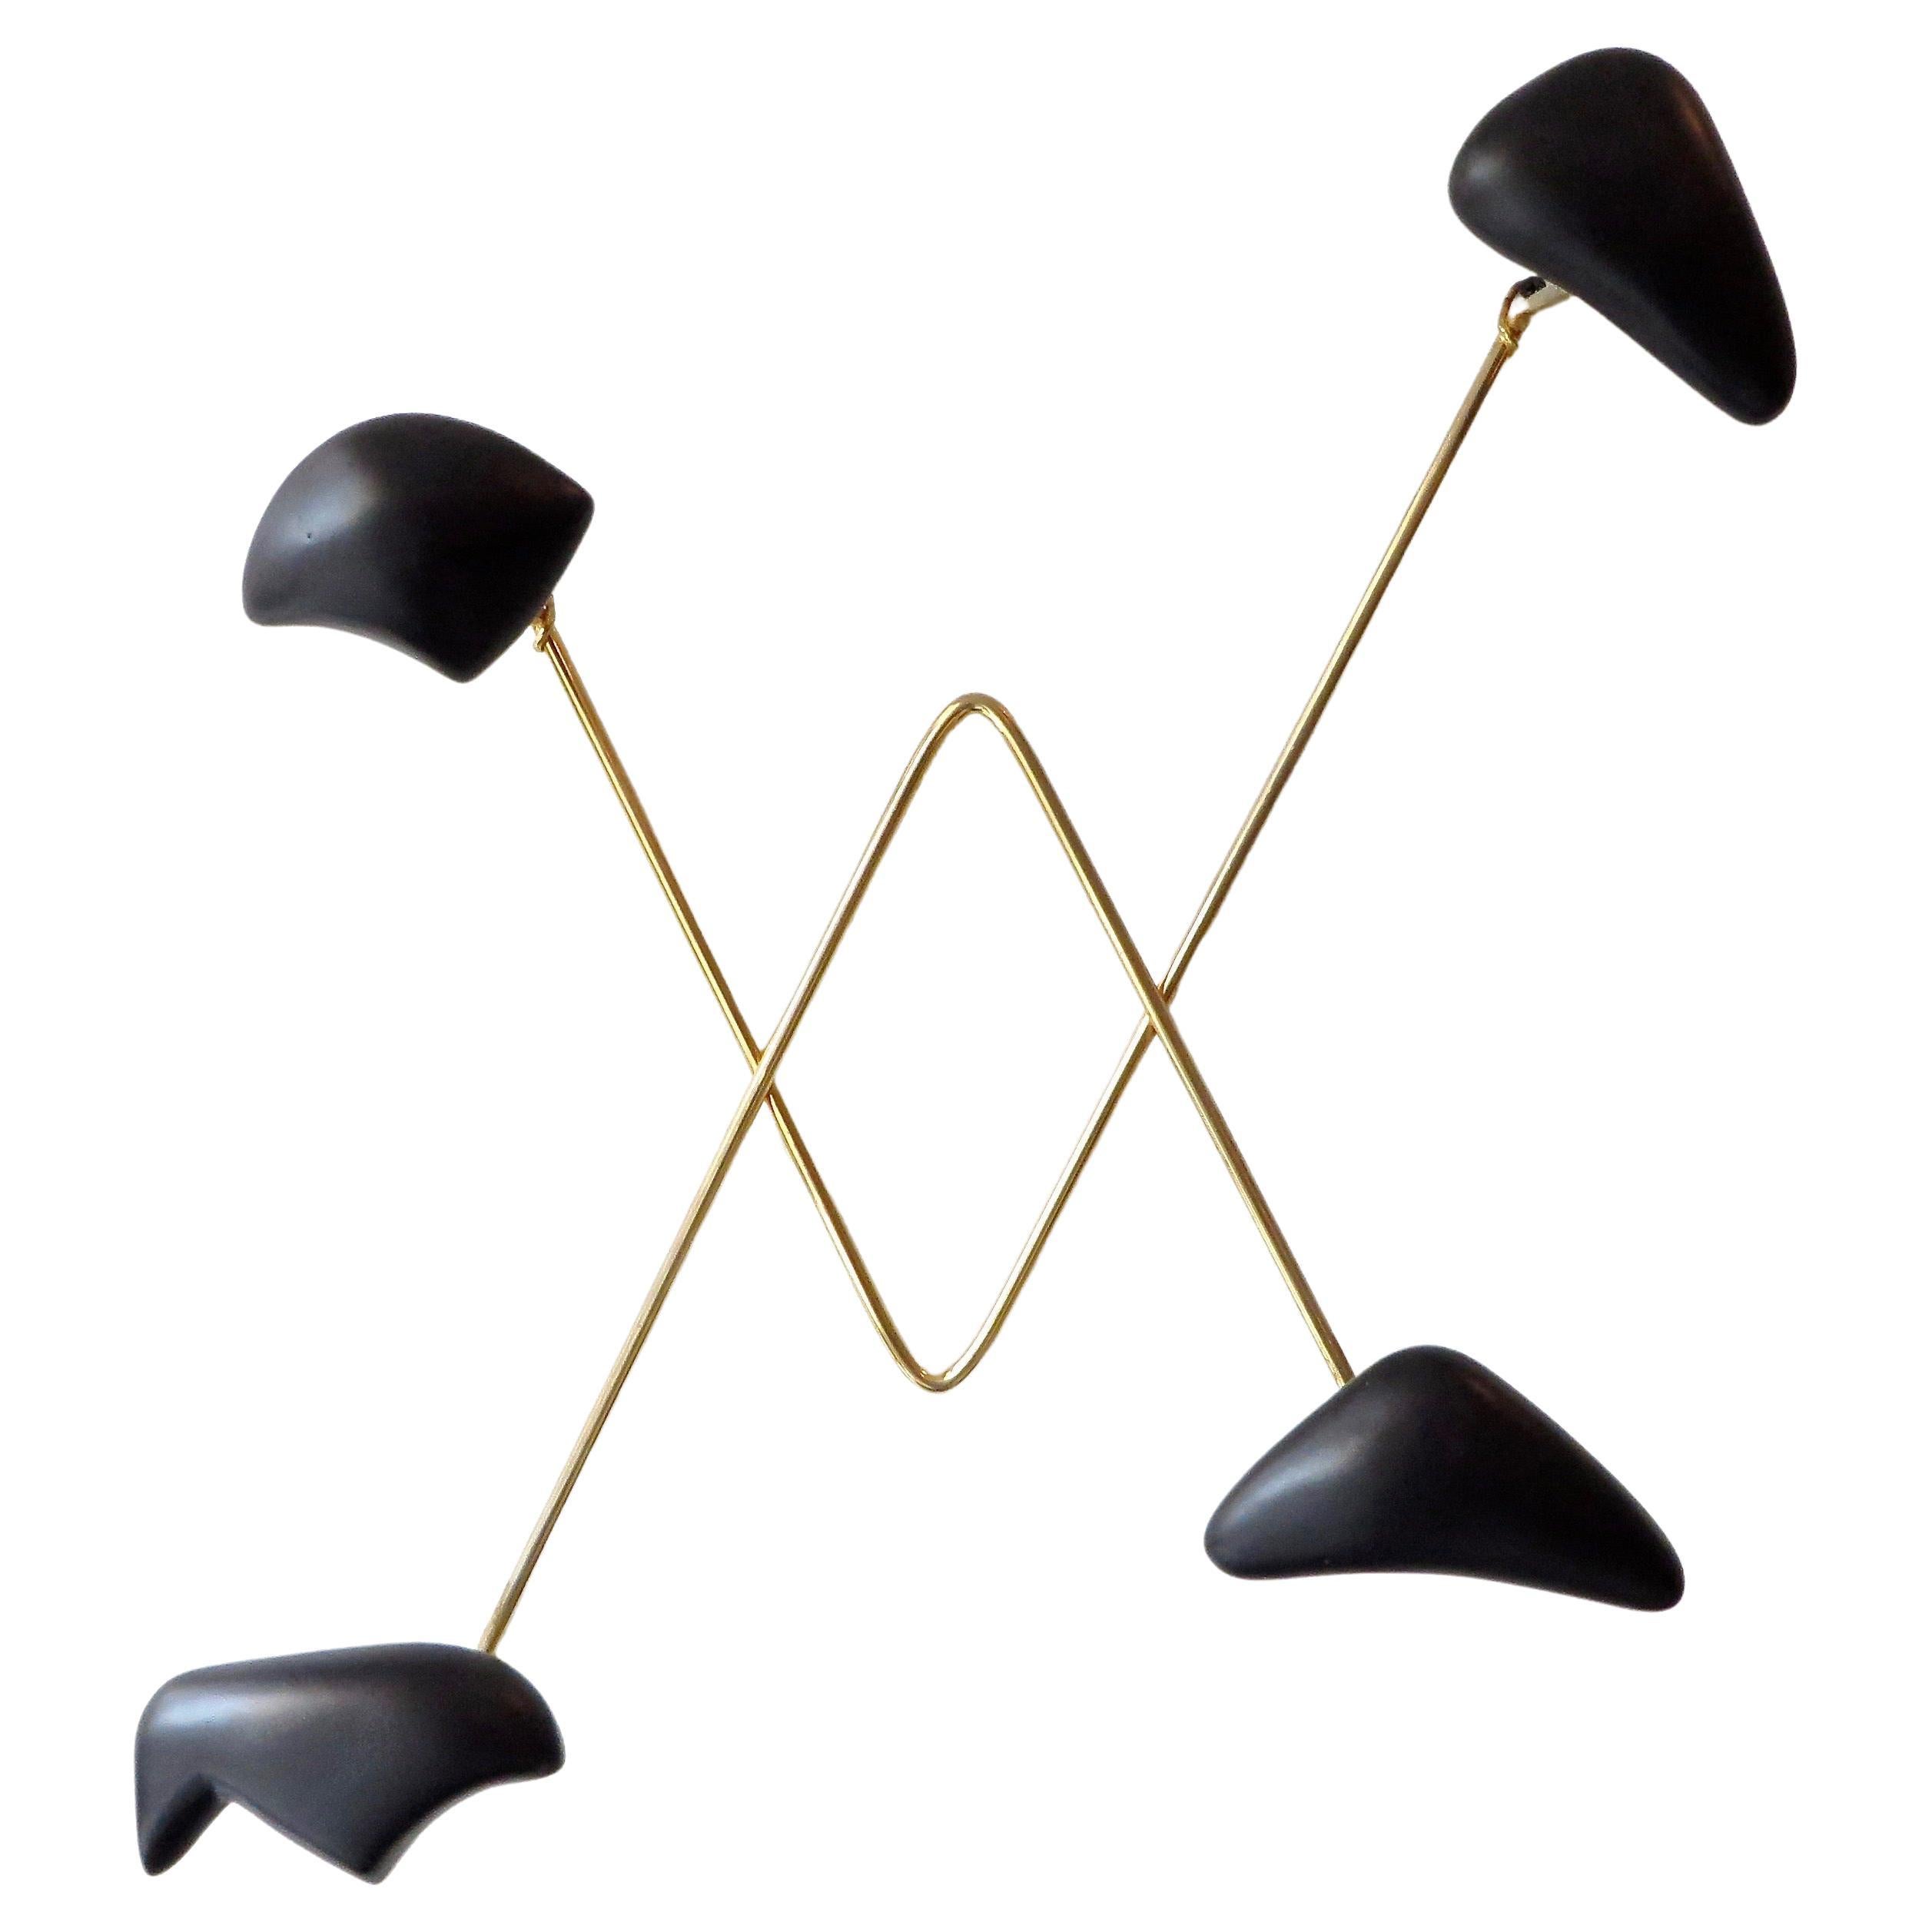  Georges Jouve and Marcel Asselbur Ceramic and Brass Wall Mounted Hat Coat Rack 